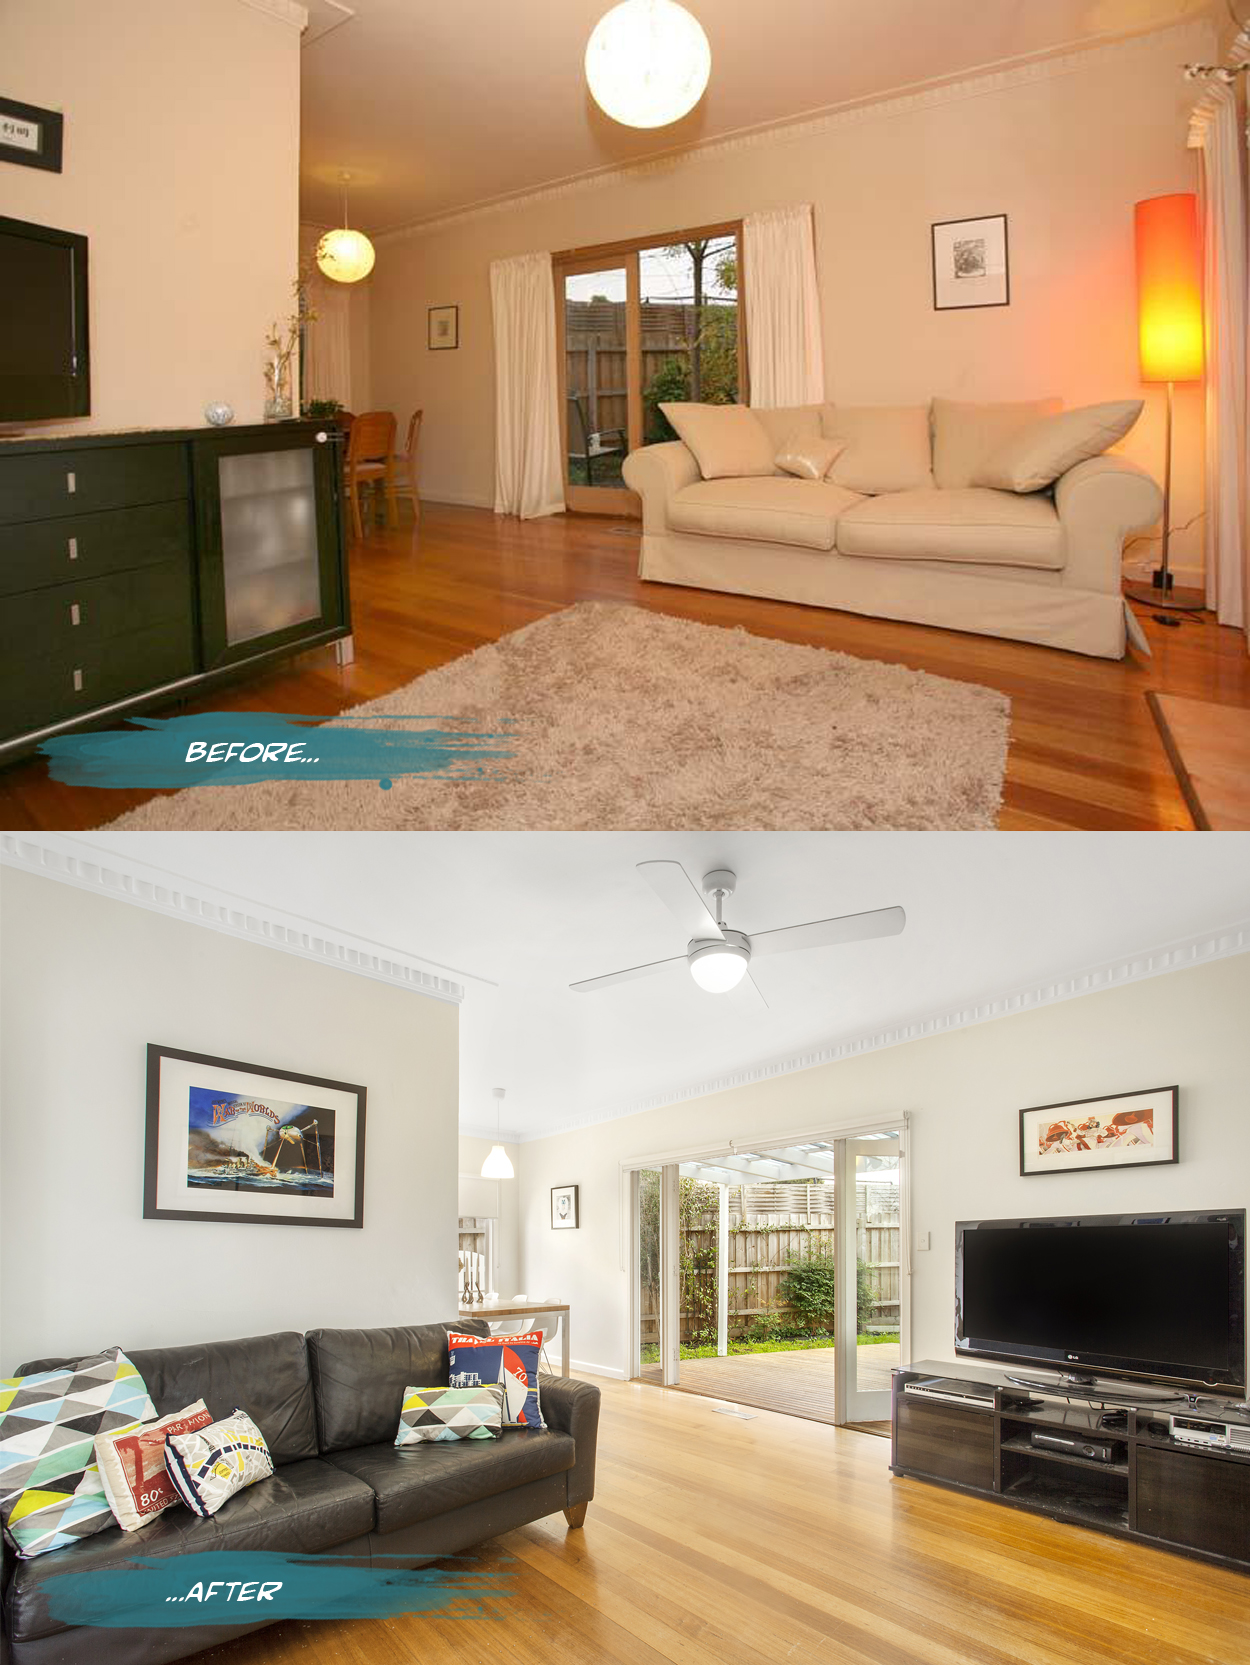 Lounge before and after on Romona Sandon Designs blog. #interiors #beforeandafter #styling #home #lounge